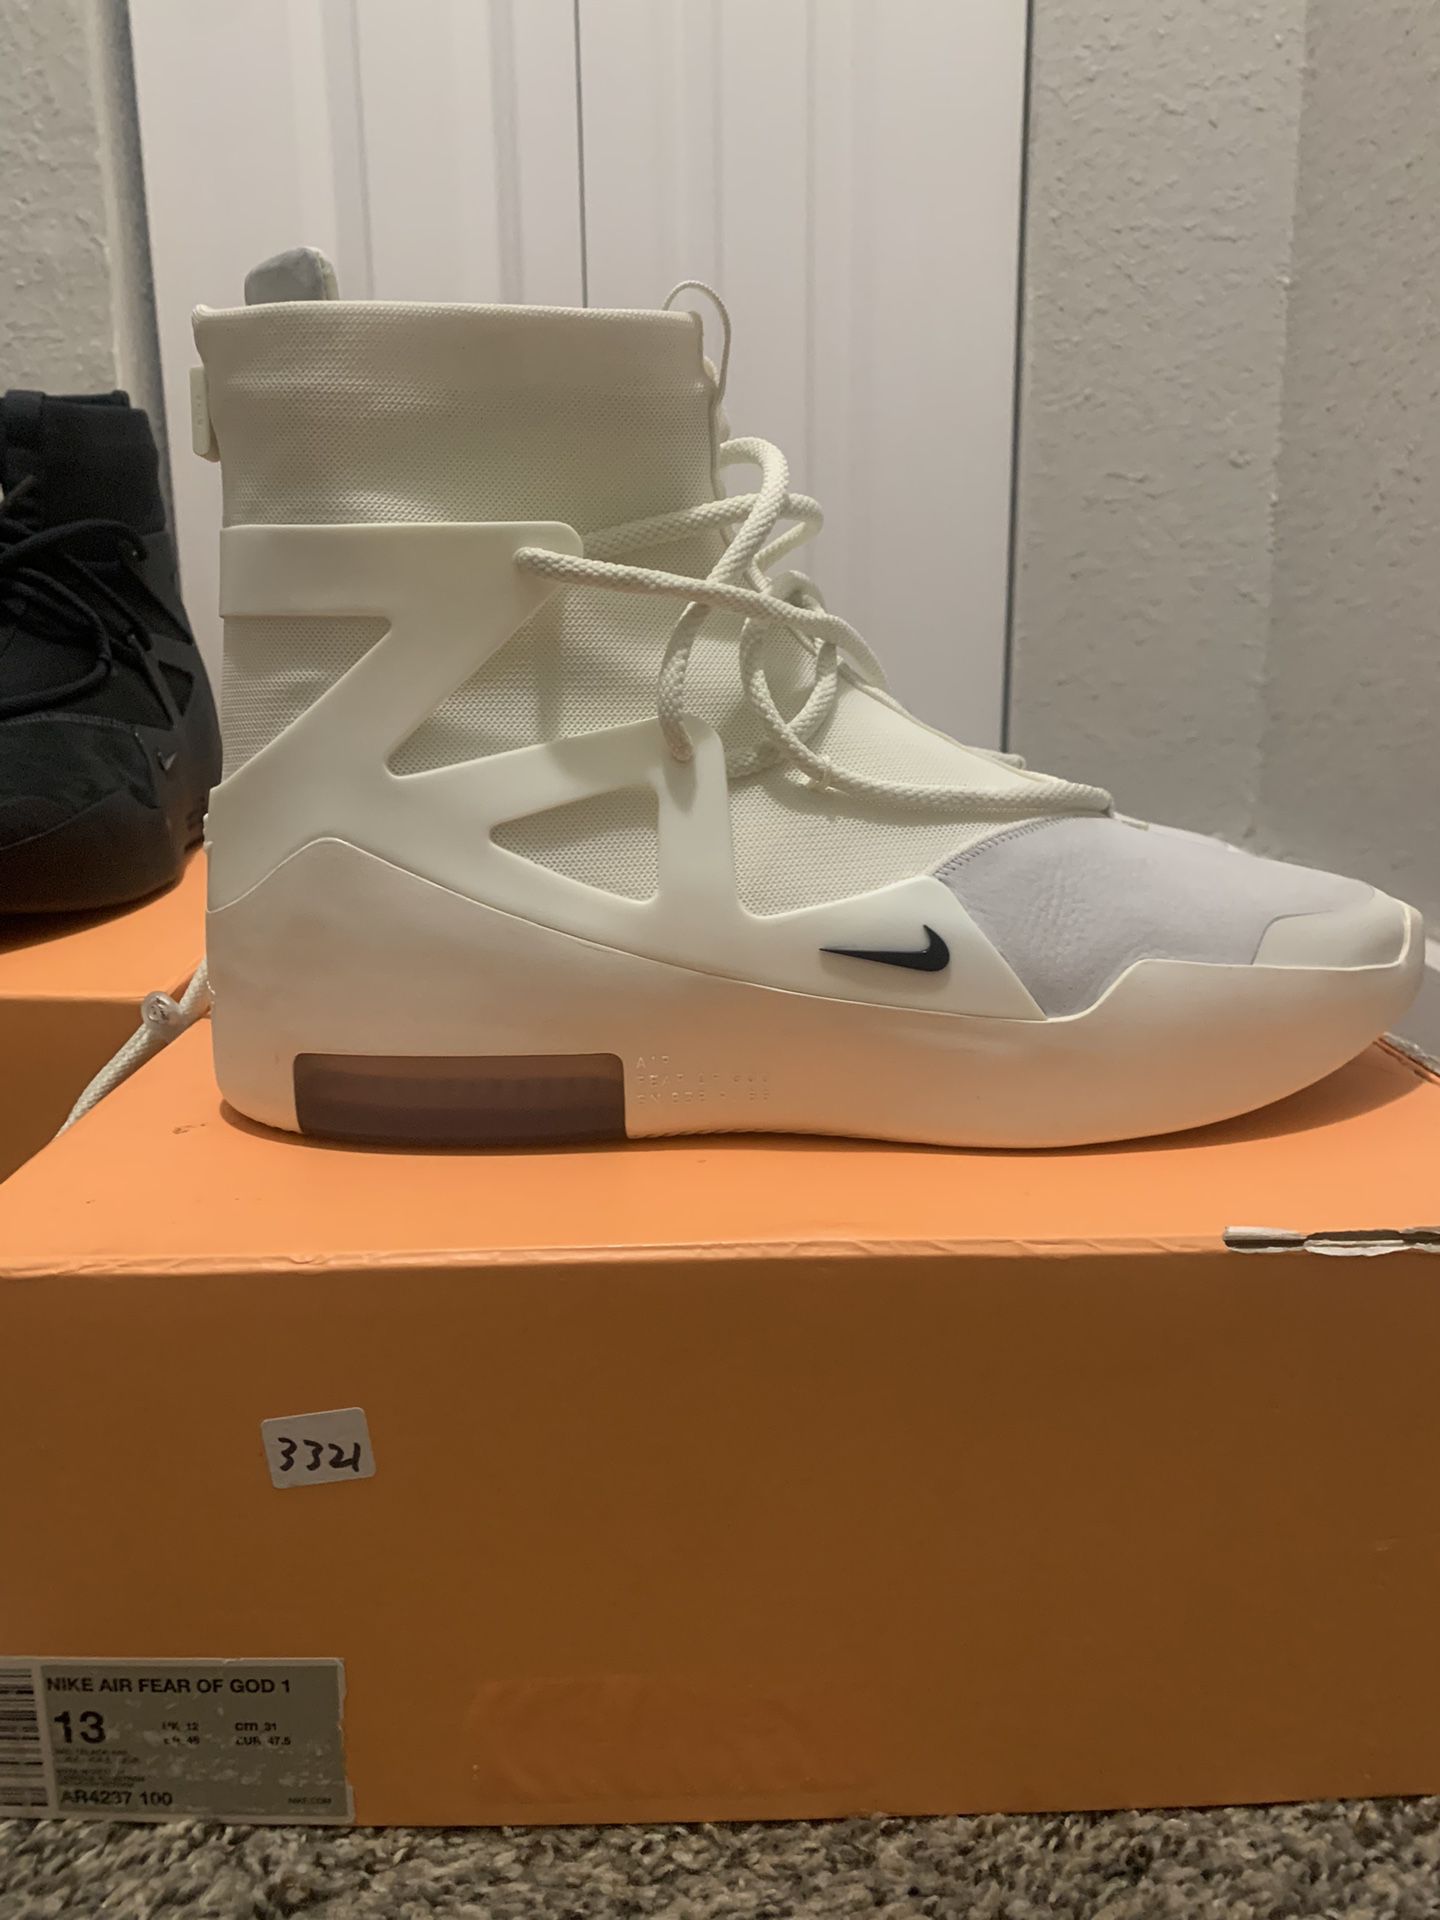 Nike Air Fear Of God Size Sail Size 13